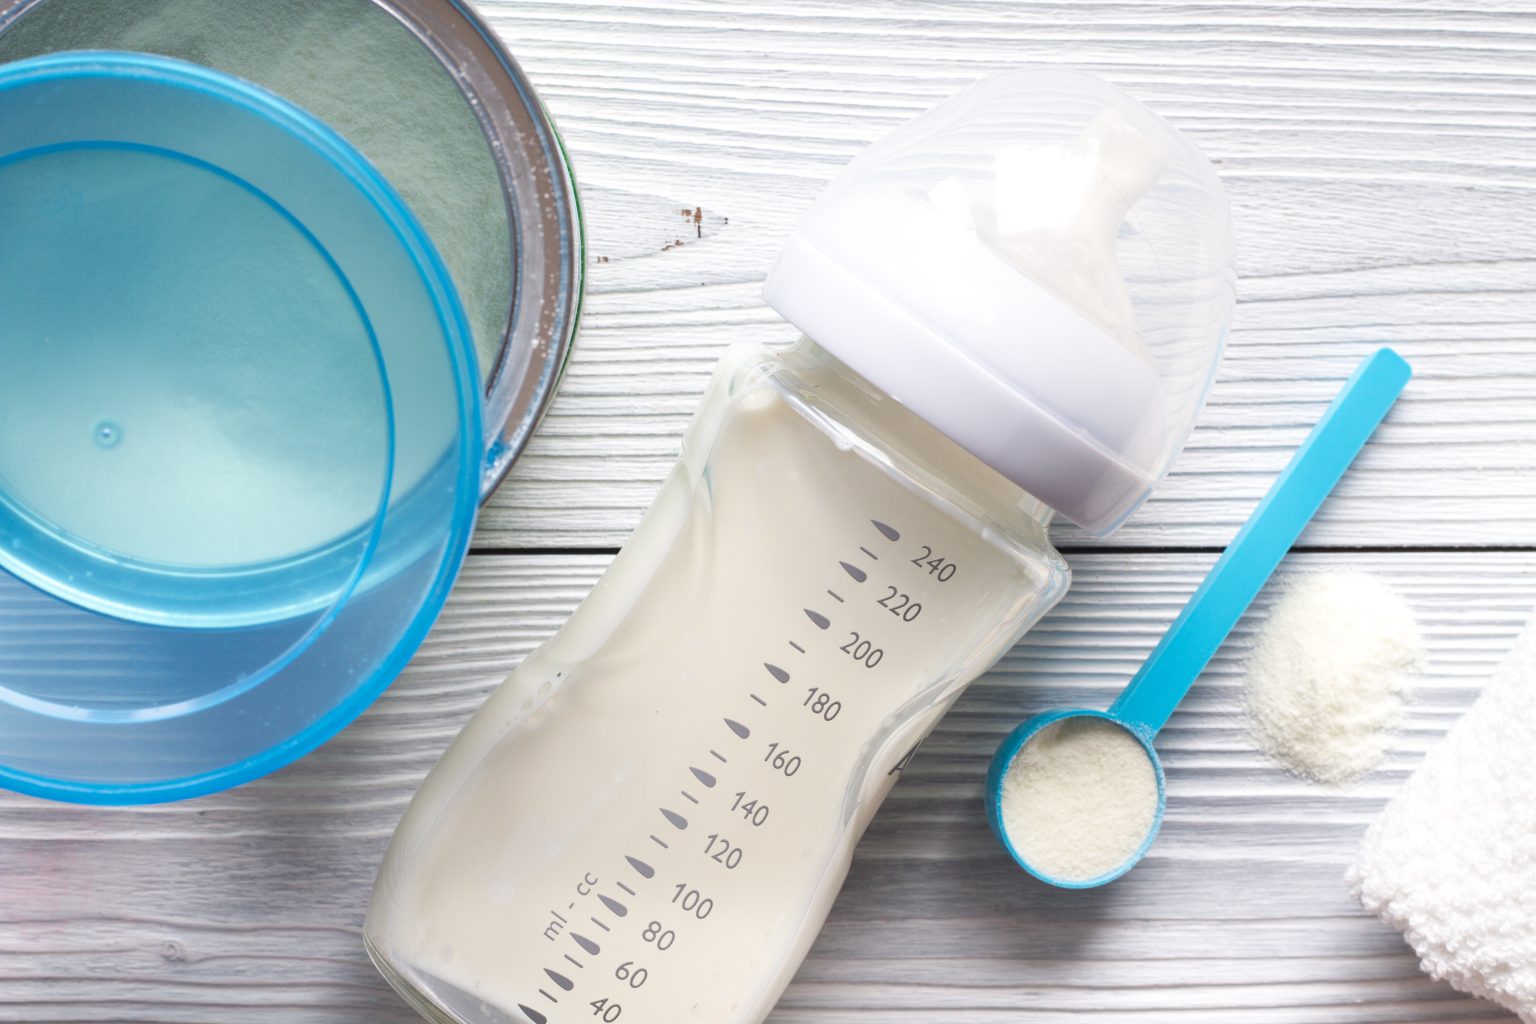 FDA sends warning letters to three infant formula manufacturers